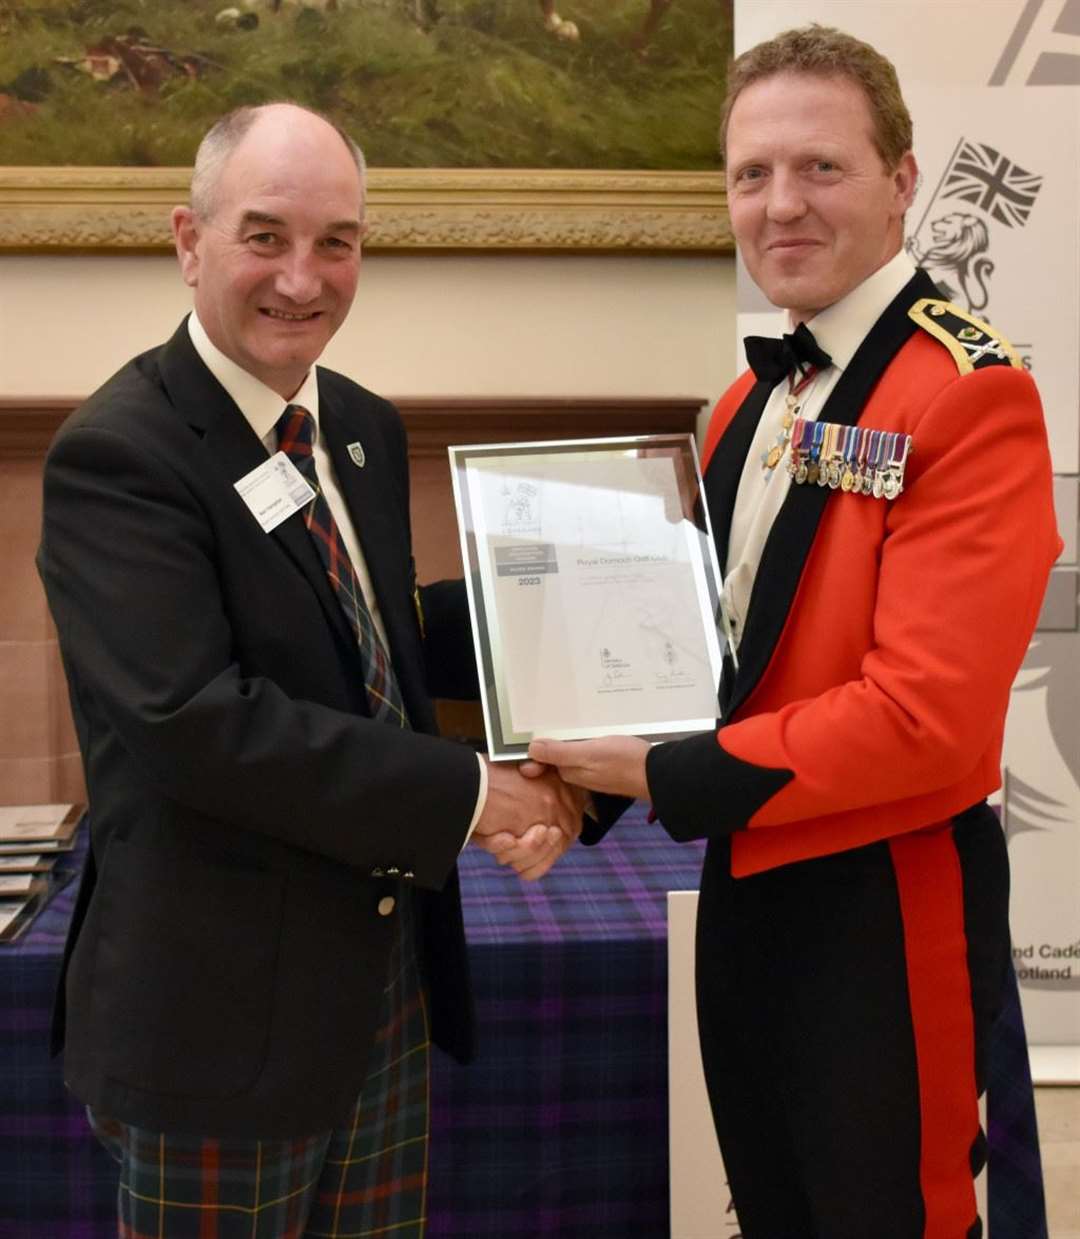 Neil Hampton, general manager of Royal Dornoch Golf Club, is presented with a Defence Employer Recognition Scheme Silver Award by Major General Bill Wright, General Officer Scotland, at a ceremony in Perth.